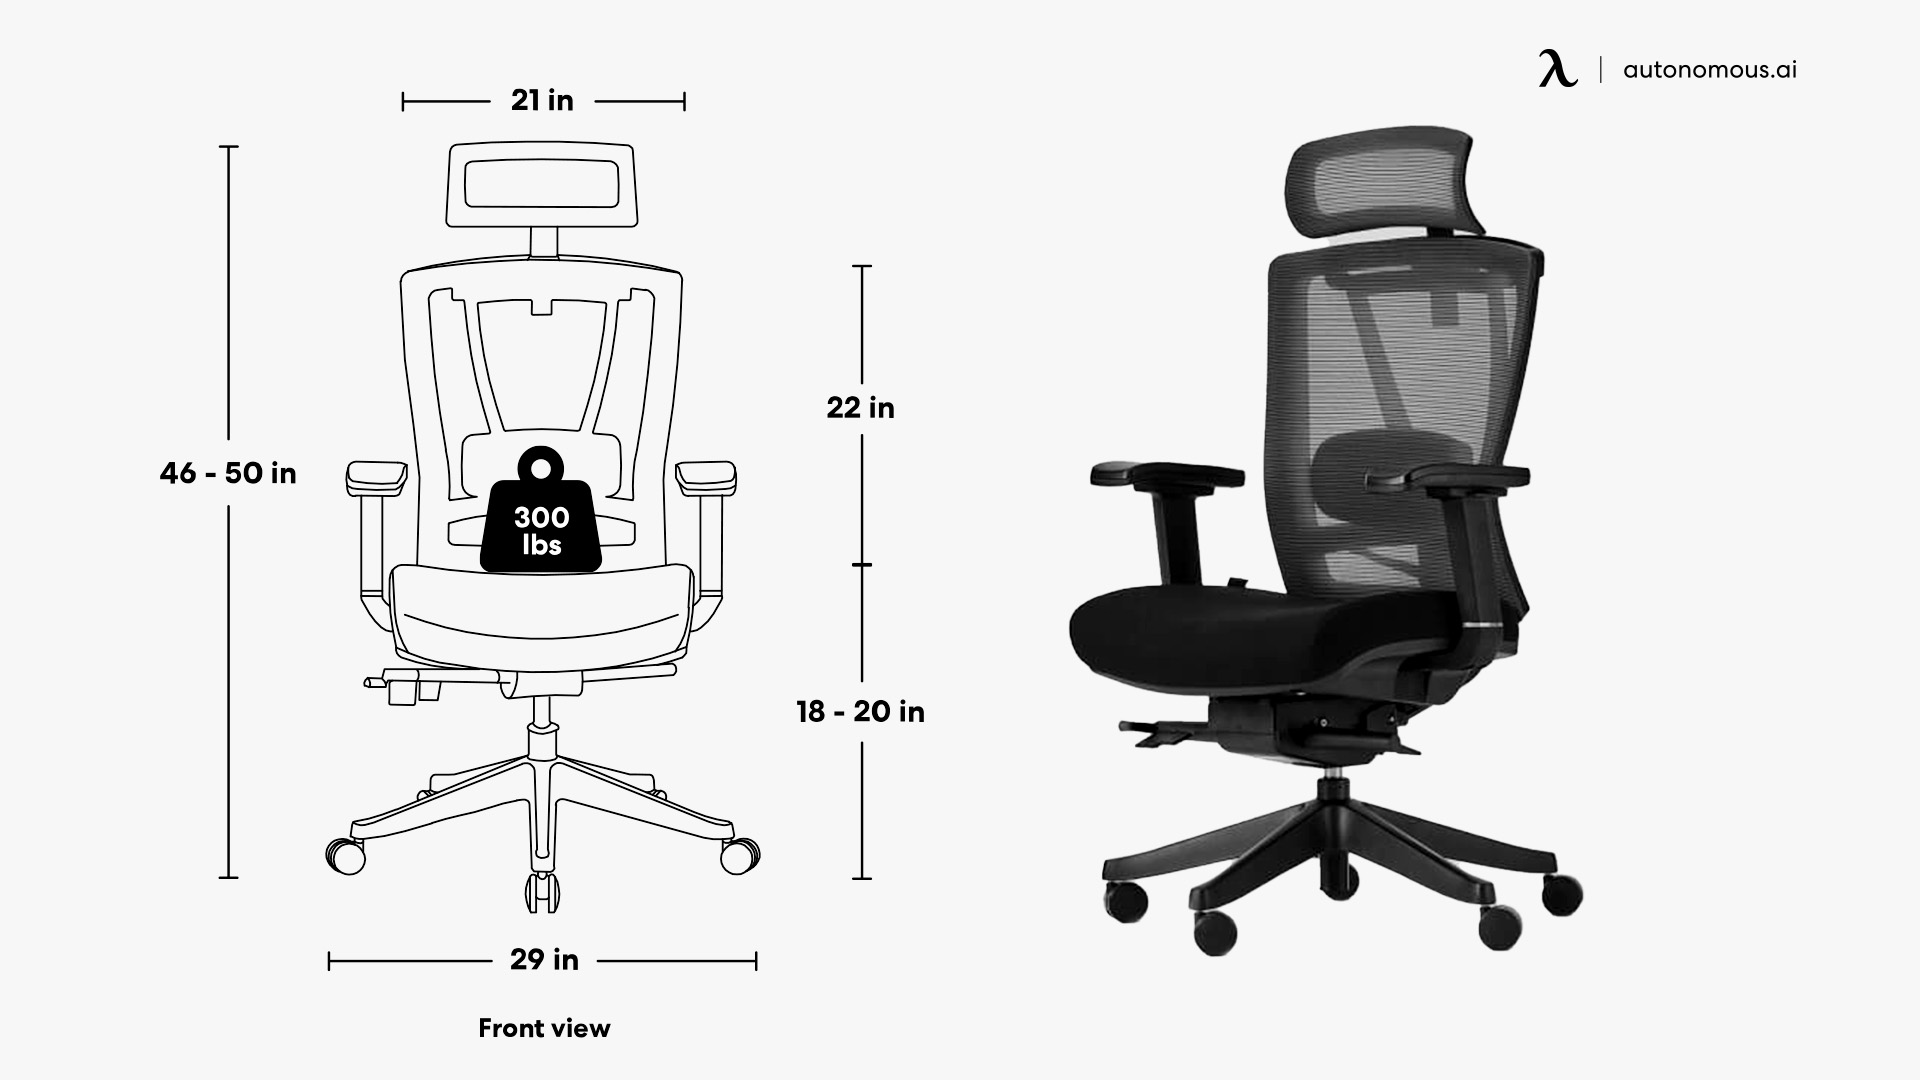 The back tension, seat angle and height, and seat position may all be adjusted